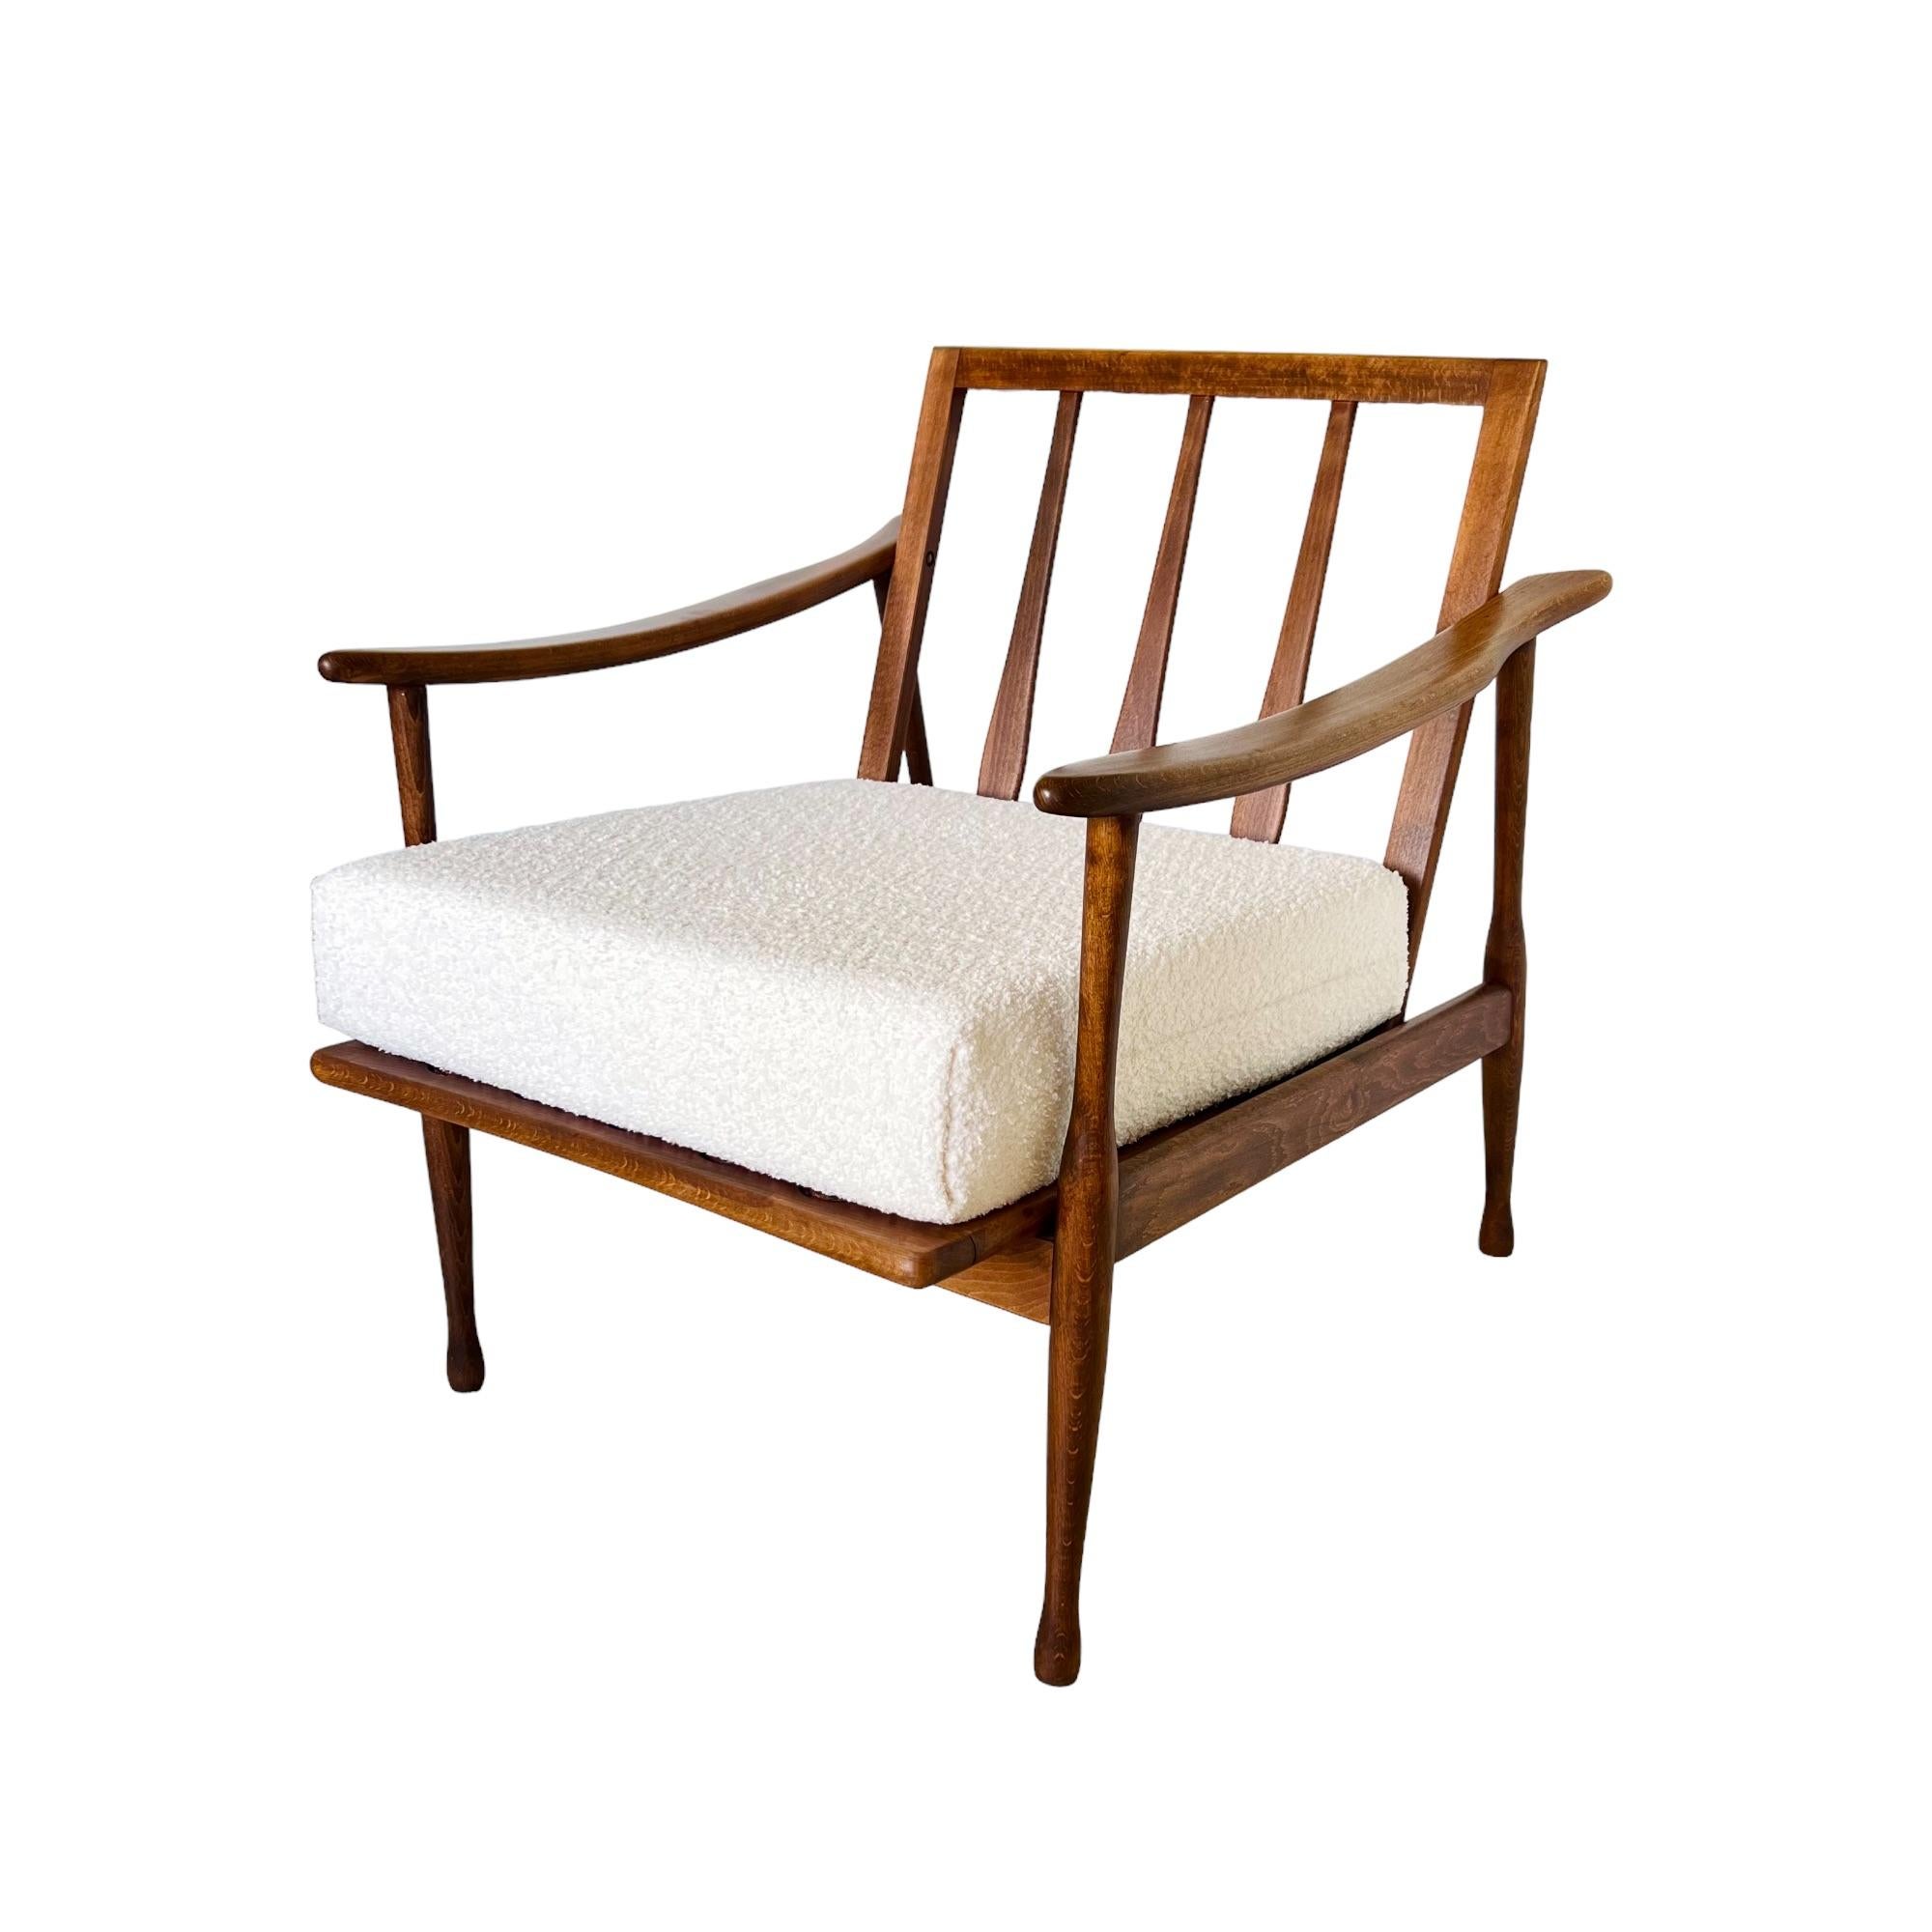 A mid-century modern low lounge chair crafted of beautifully grained walnut with an alabaster white boucle fabric seat cushion. The frame is sculpted in a manner reminiscent of Gio Ponti and Otto Gerdau and may indicate Italian origin, circa. 1950s